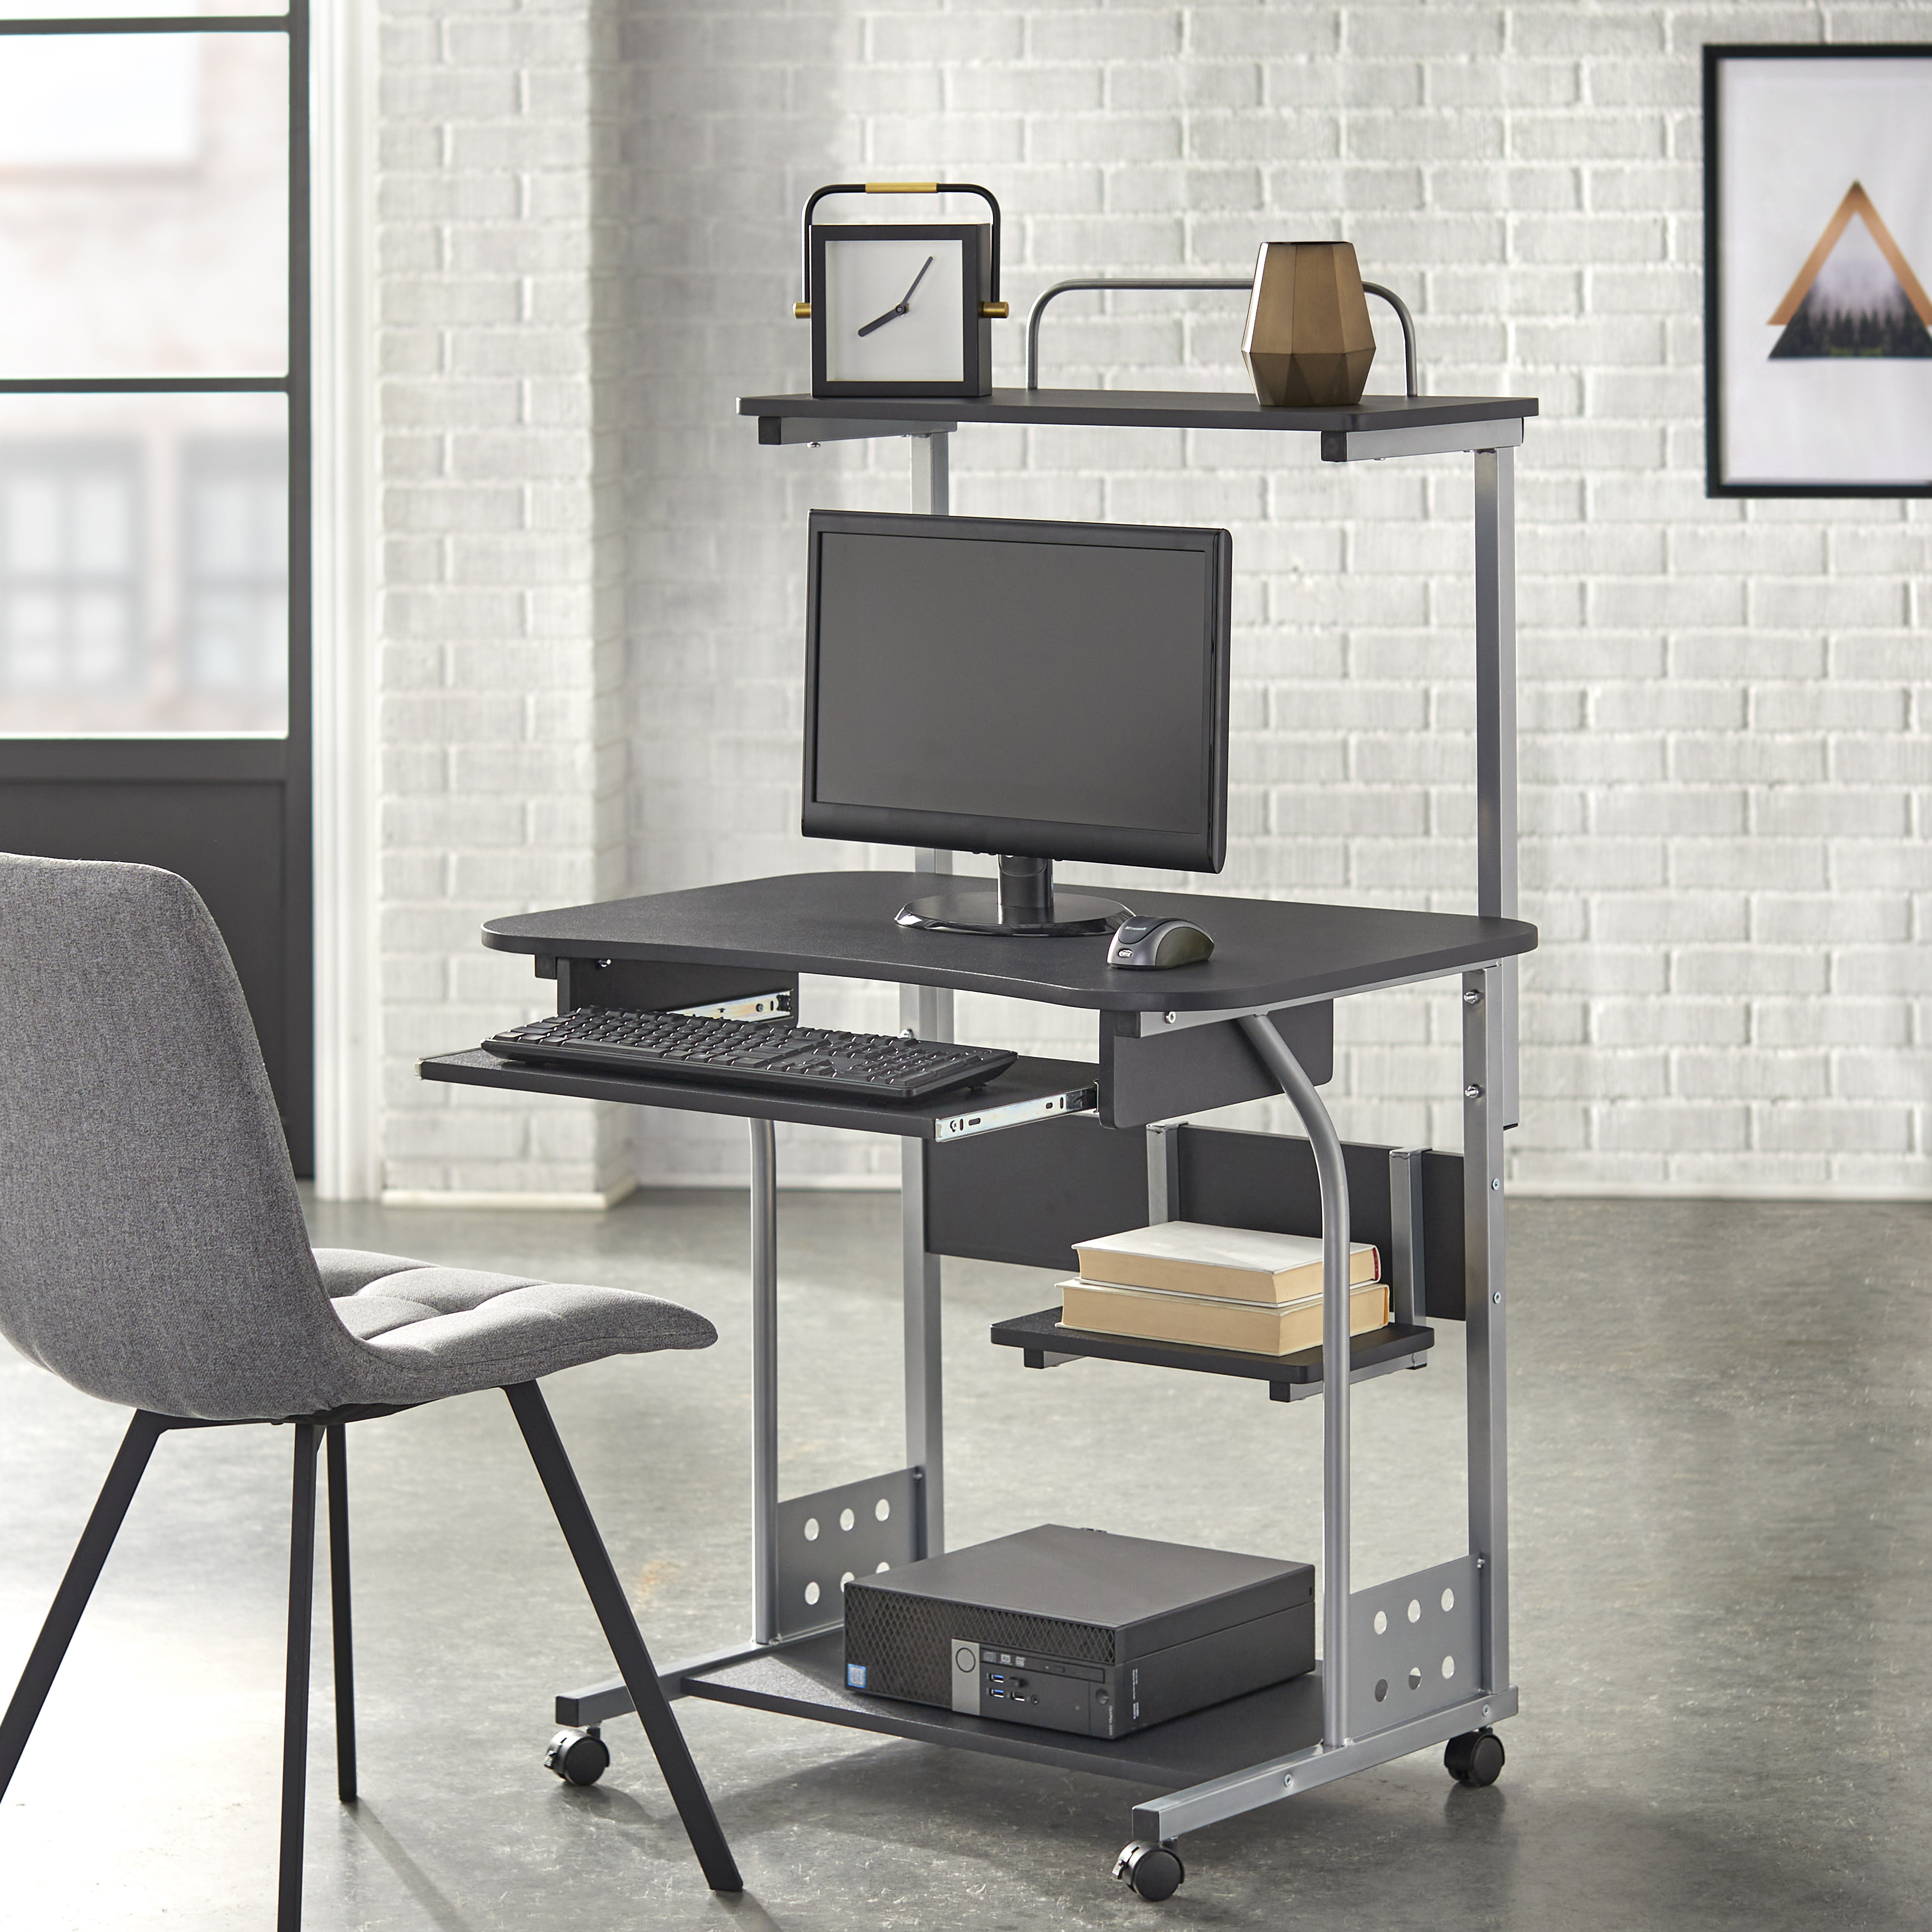 Buylateral Mobile Computer Tower Desk with Storage - image 3 of 3